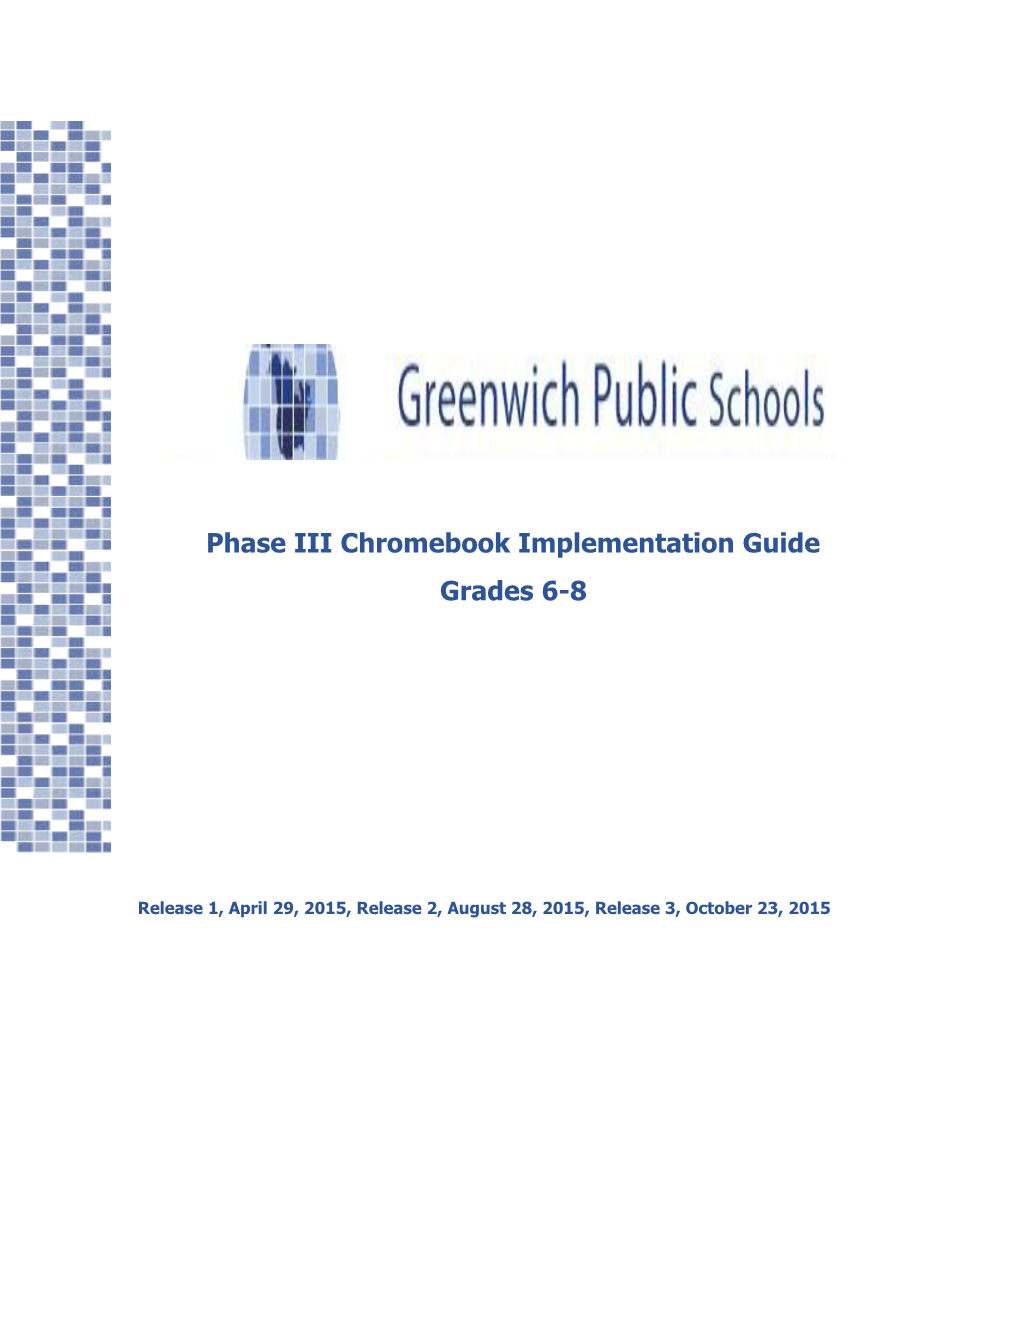 Phase III Chromebook Implementation Guide